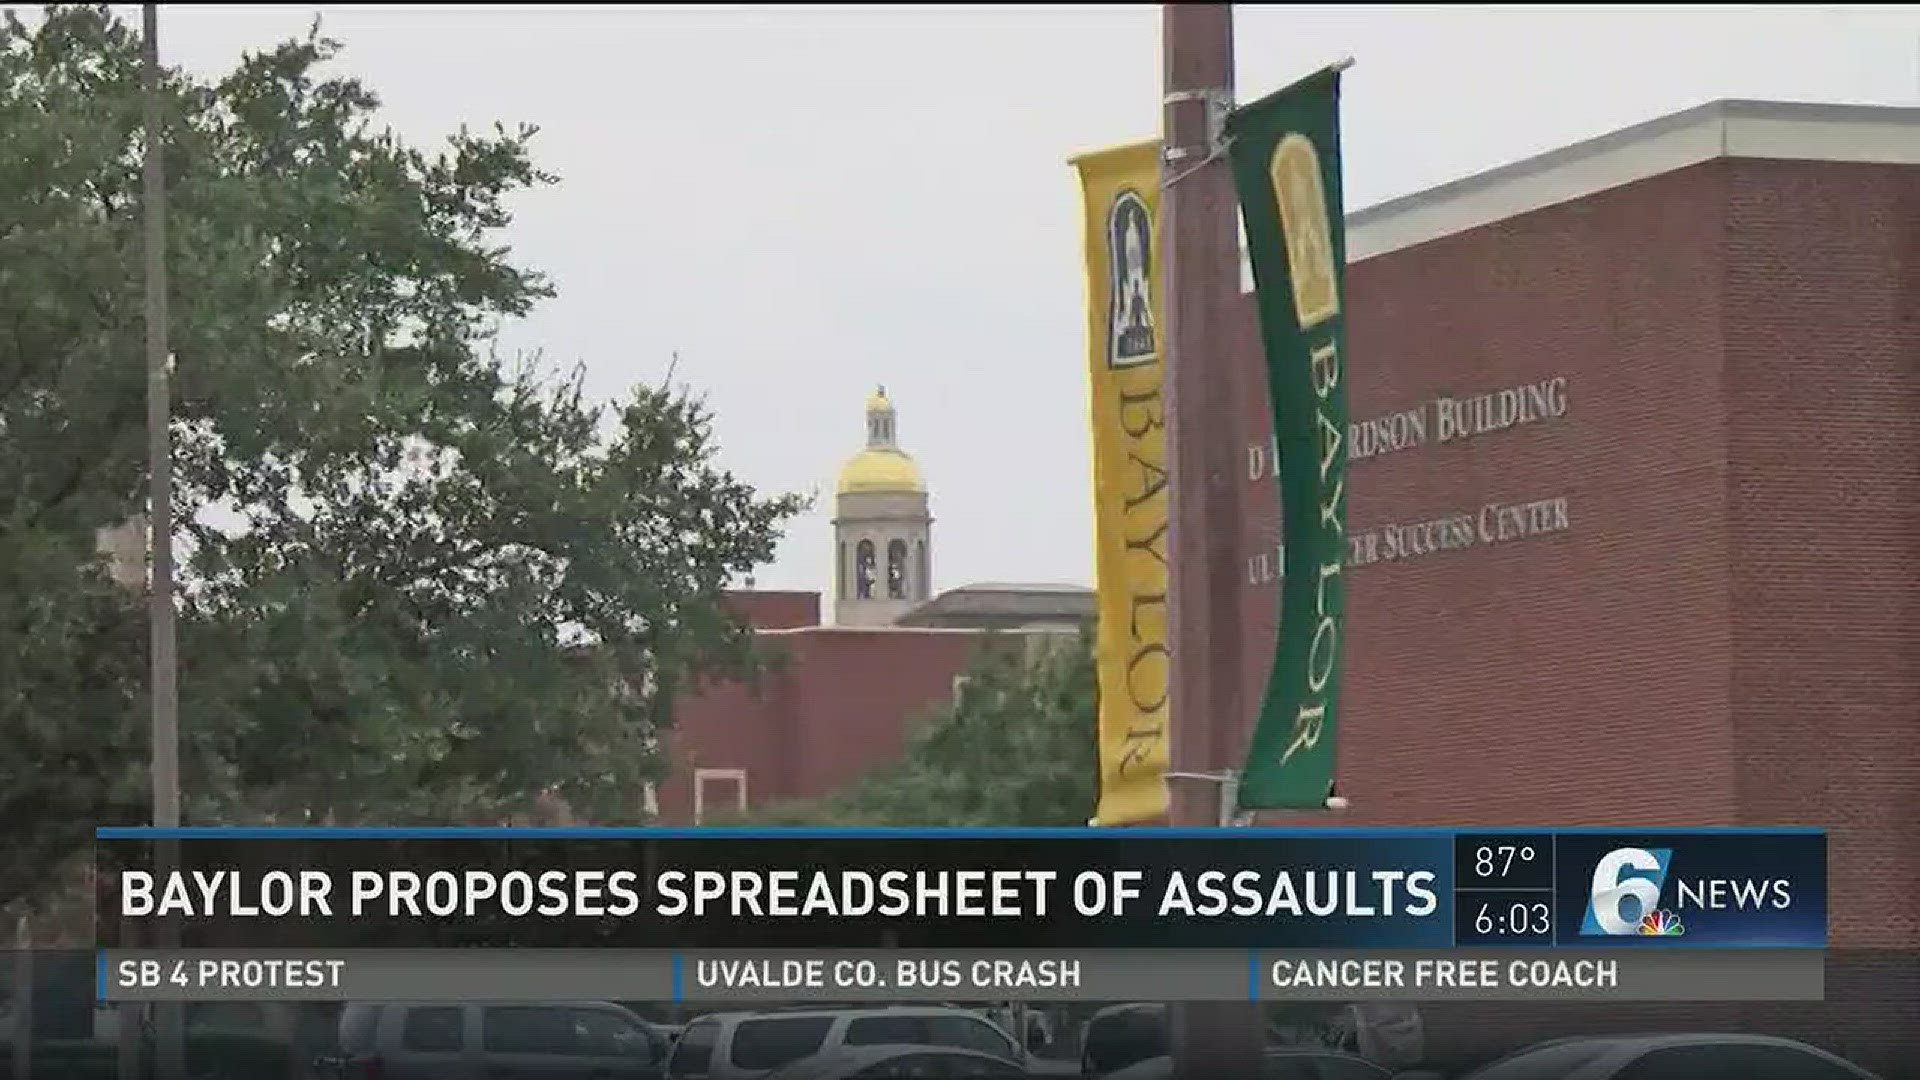 Baylor University has proposed to produce a spreadsheet detailing all sexual assault reports brought to the university's attention dating all the way back to 2003.